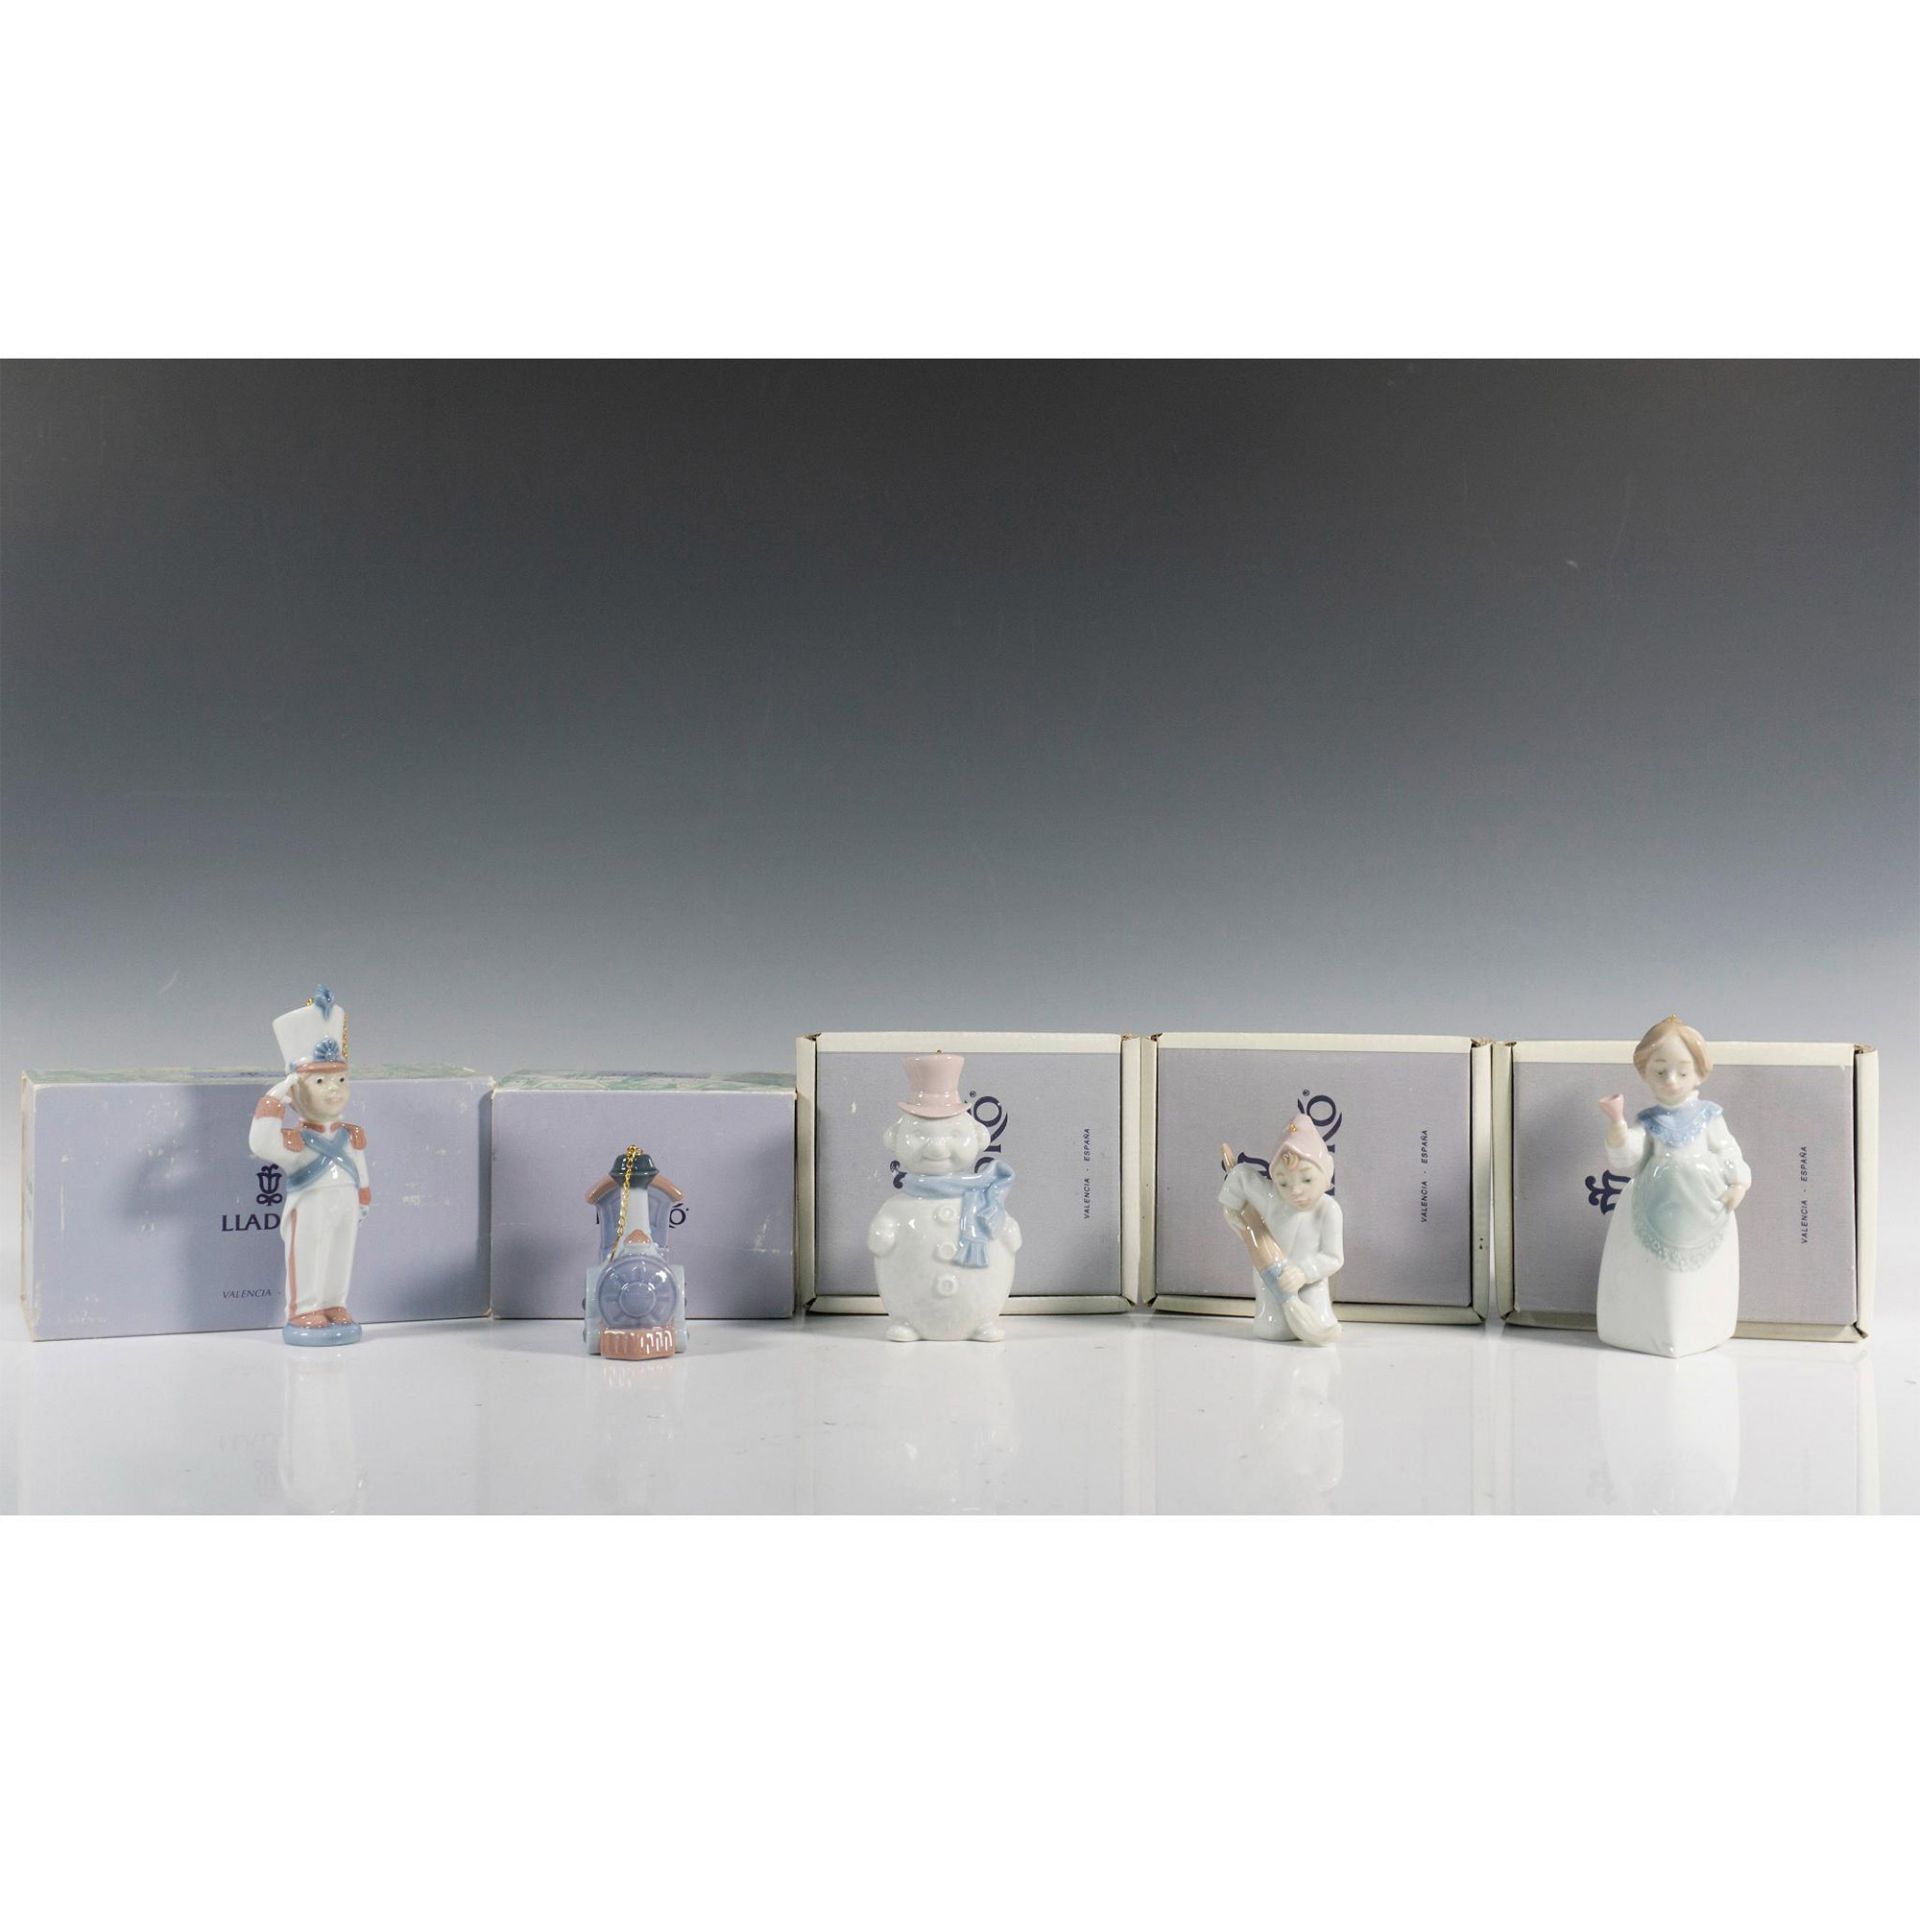 5pc Lladro Porcelain Figural Christmas Ornaments - Image 2 of 5